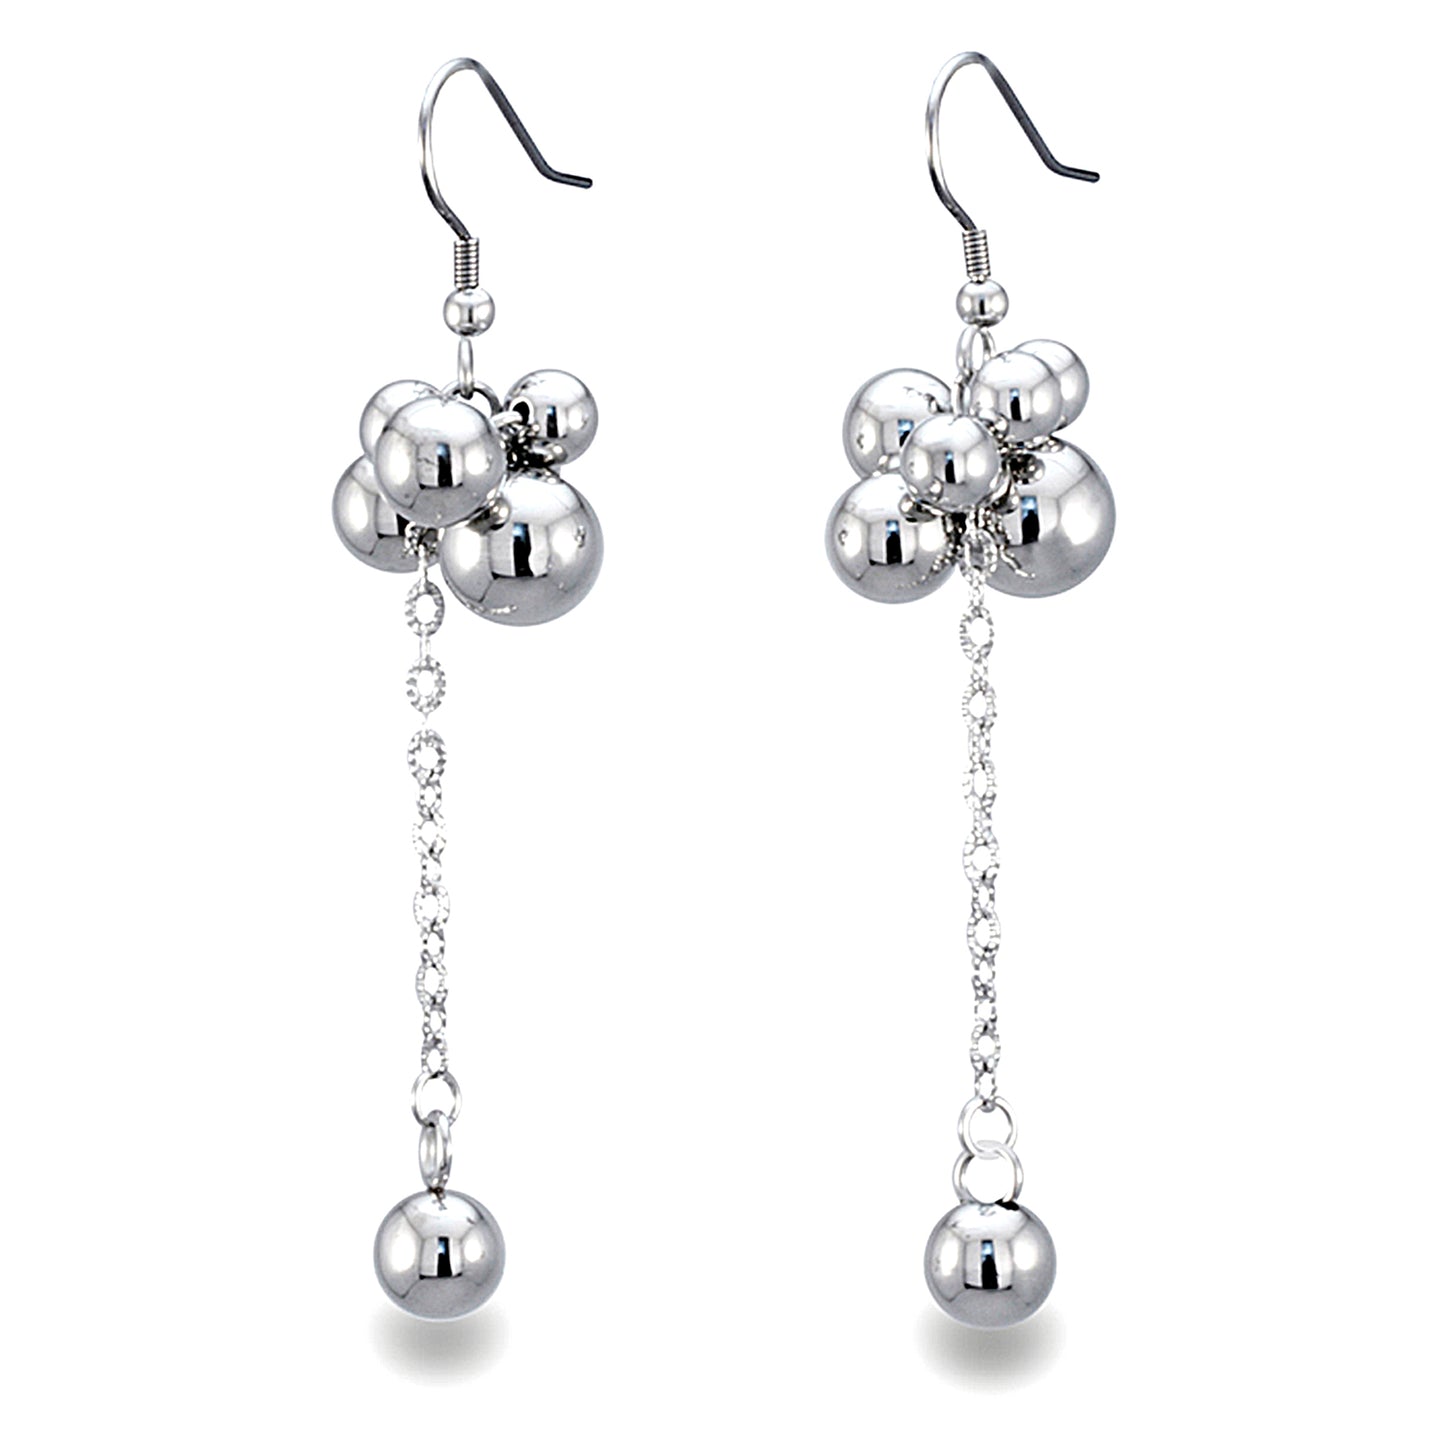 Polished Bauble Hanging Stainless Steel Earrings